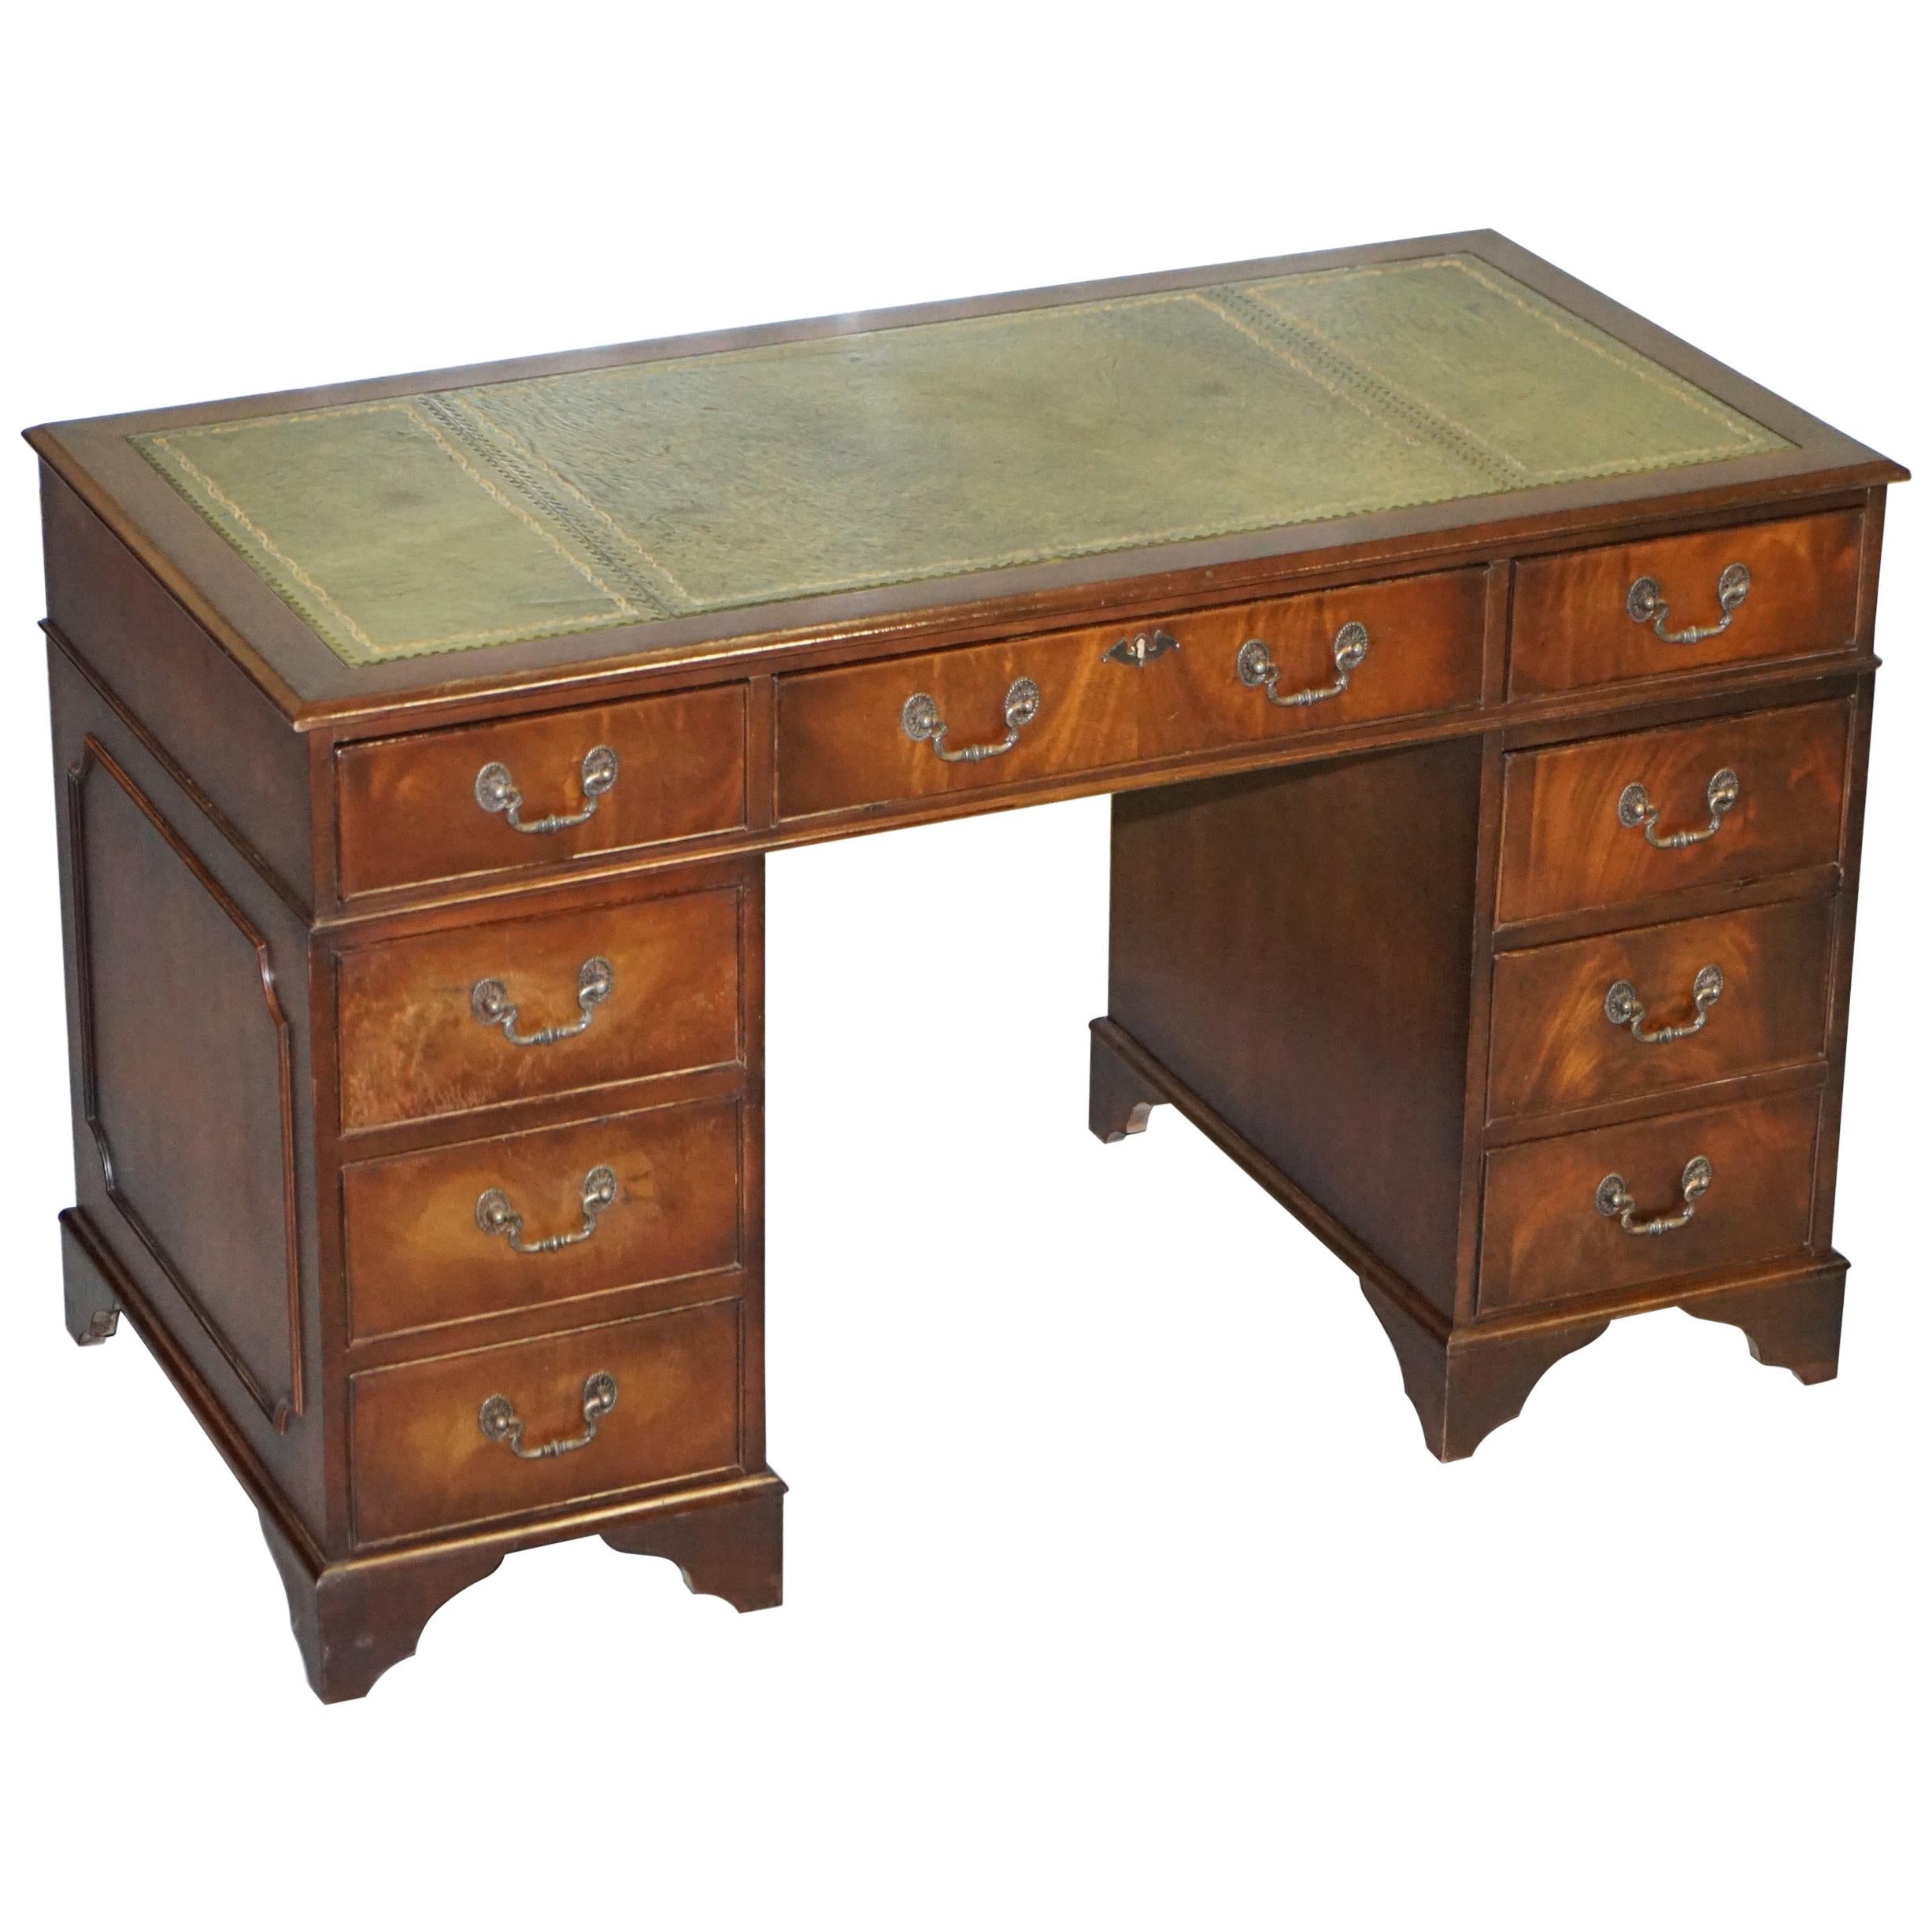 Flamed Hardwood with Green Leather Writing Surface Twin Pedestal Partner Desk